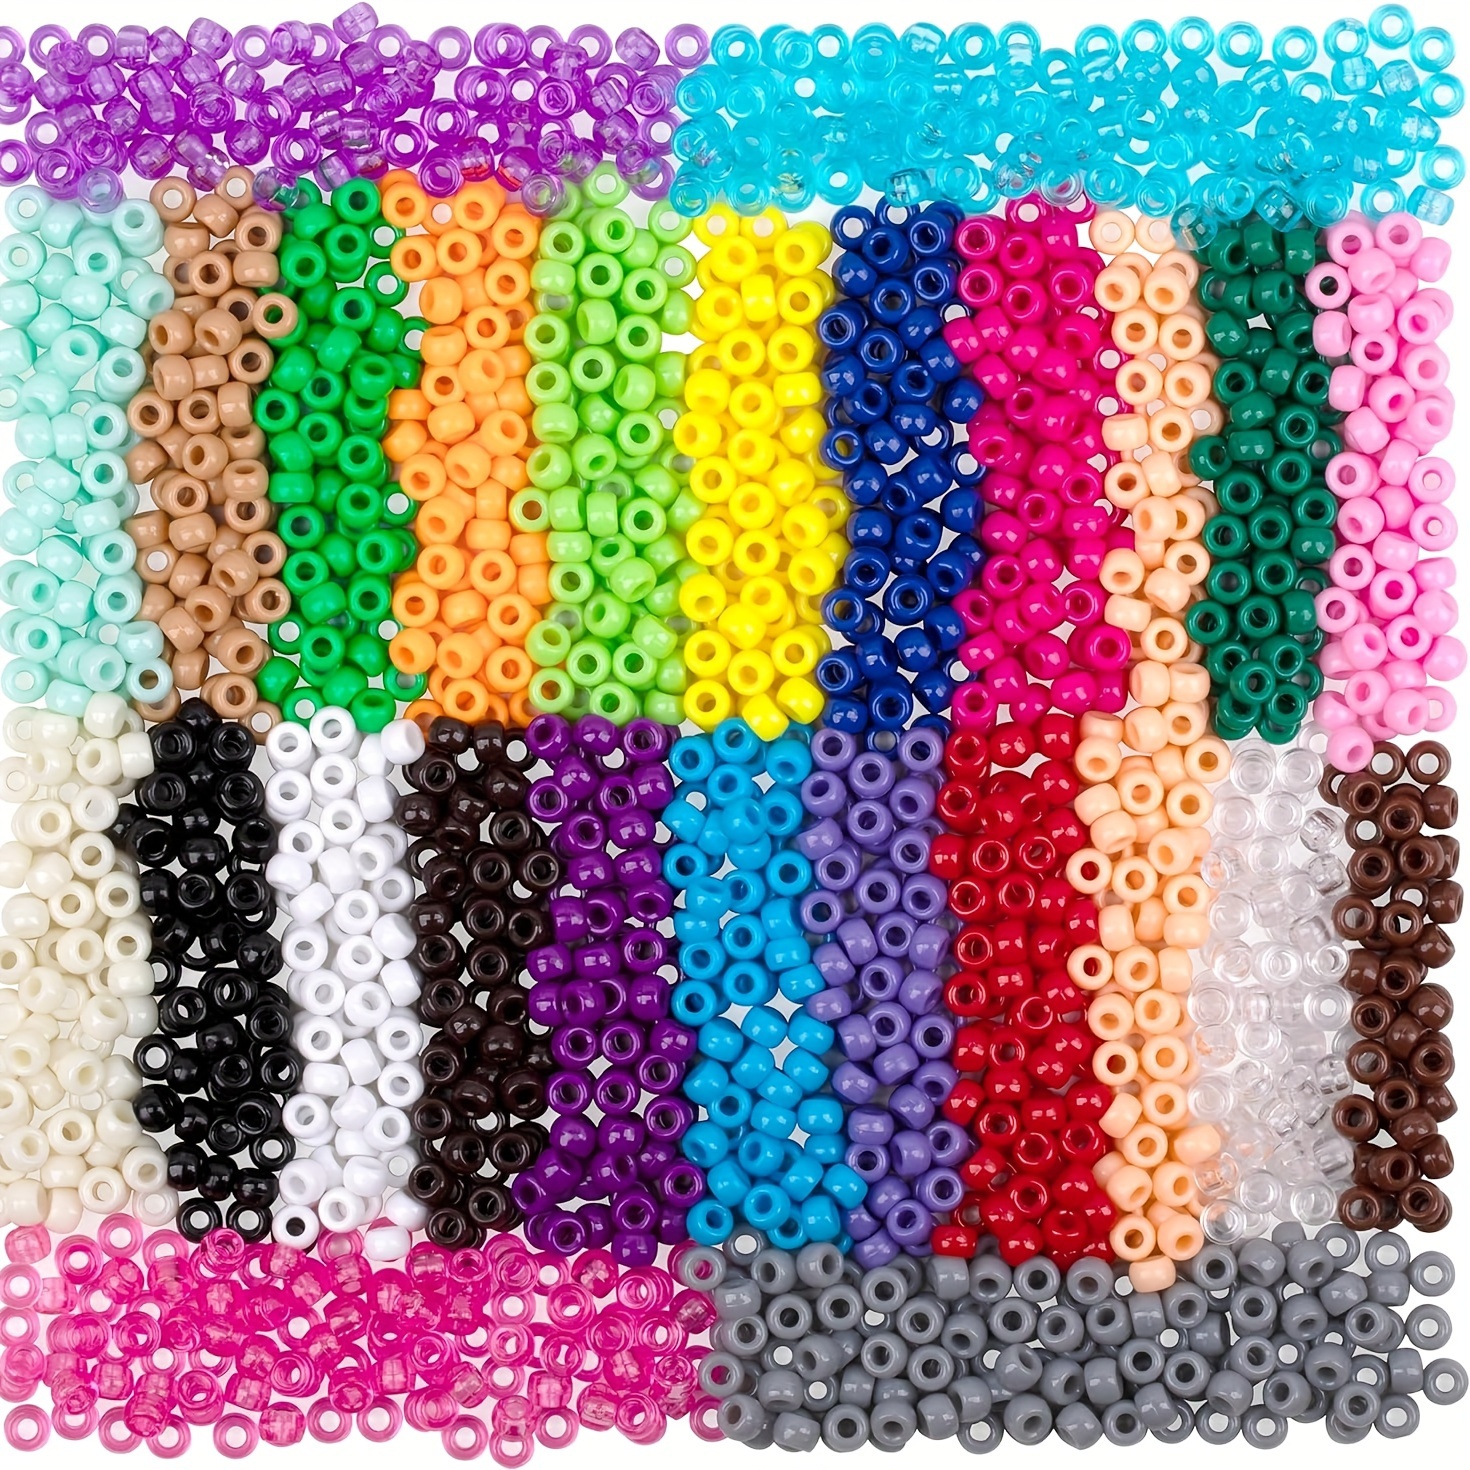 

600pcs Multicolor Pony Beads Mixed Plastic Craft Perforated Beads Bulk For Rainbow Hair Braids Diy Bracelet Necklace Earrings Other Decors Jewelry Making Small Business Supplies